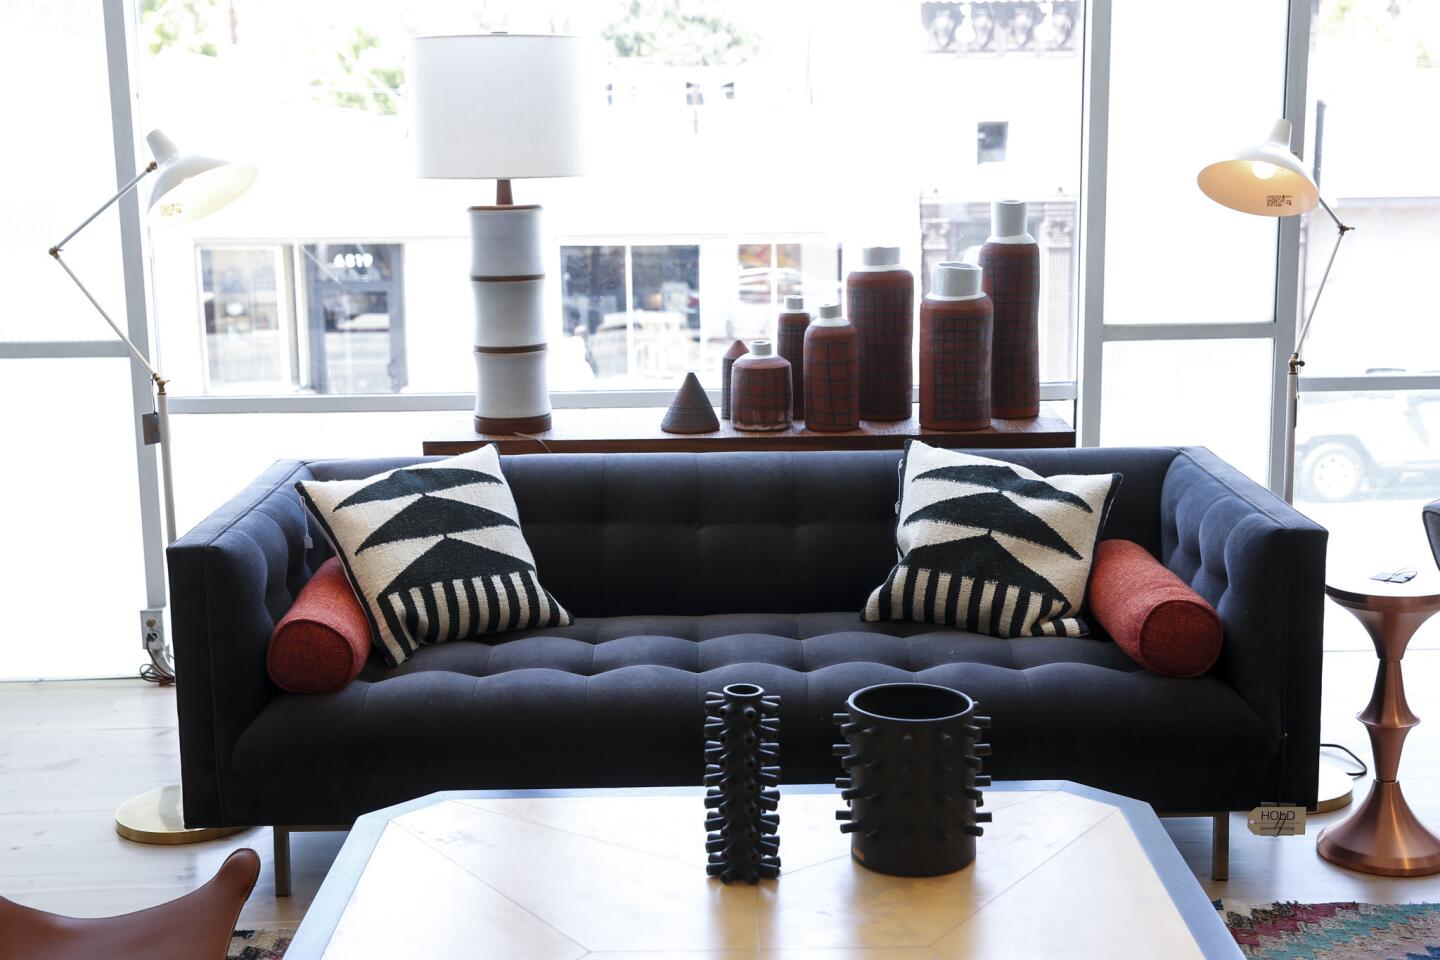 Trousdale tufted sofa by Lawson-Fenning, starts at $2,950. In the background, a ceramic lamp by Martz, $1,250. On the coffee table, ceramic vessels by Los Angeles-based ceramist Ben Medansky. At right, Lawson-Fenning's own spun metal side table, $450.